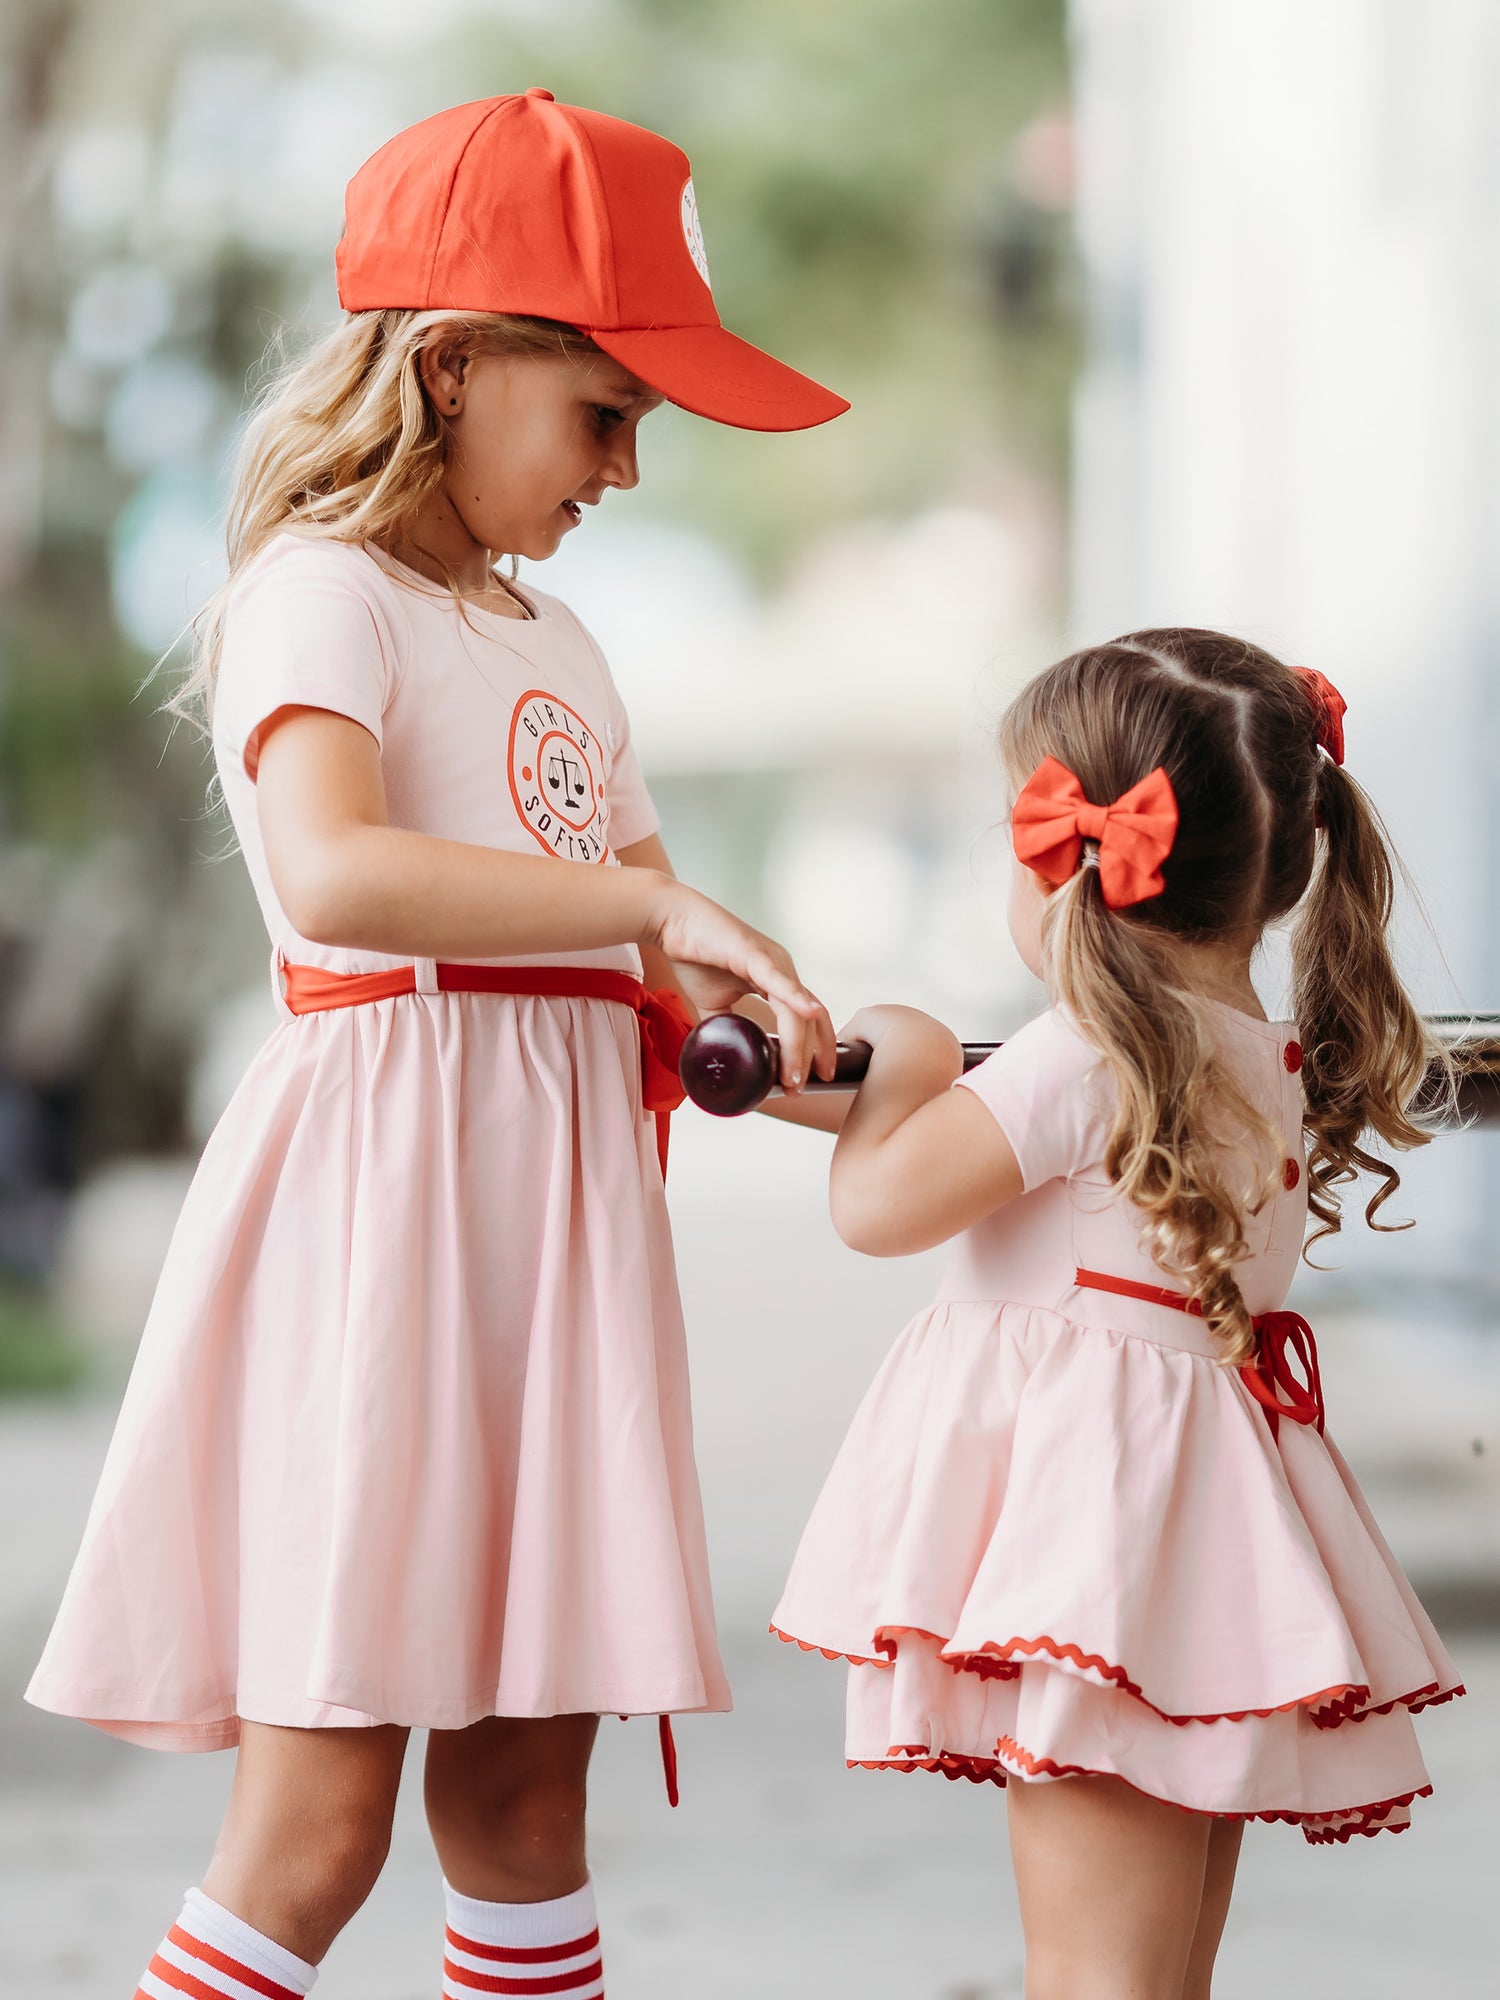 This image of a girl features the product Belle Bubble - Girls Softball. This pink double skirted dress has the same Girls Softball logo on the front as our Girl’s Softball Dress & Hat.